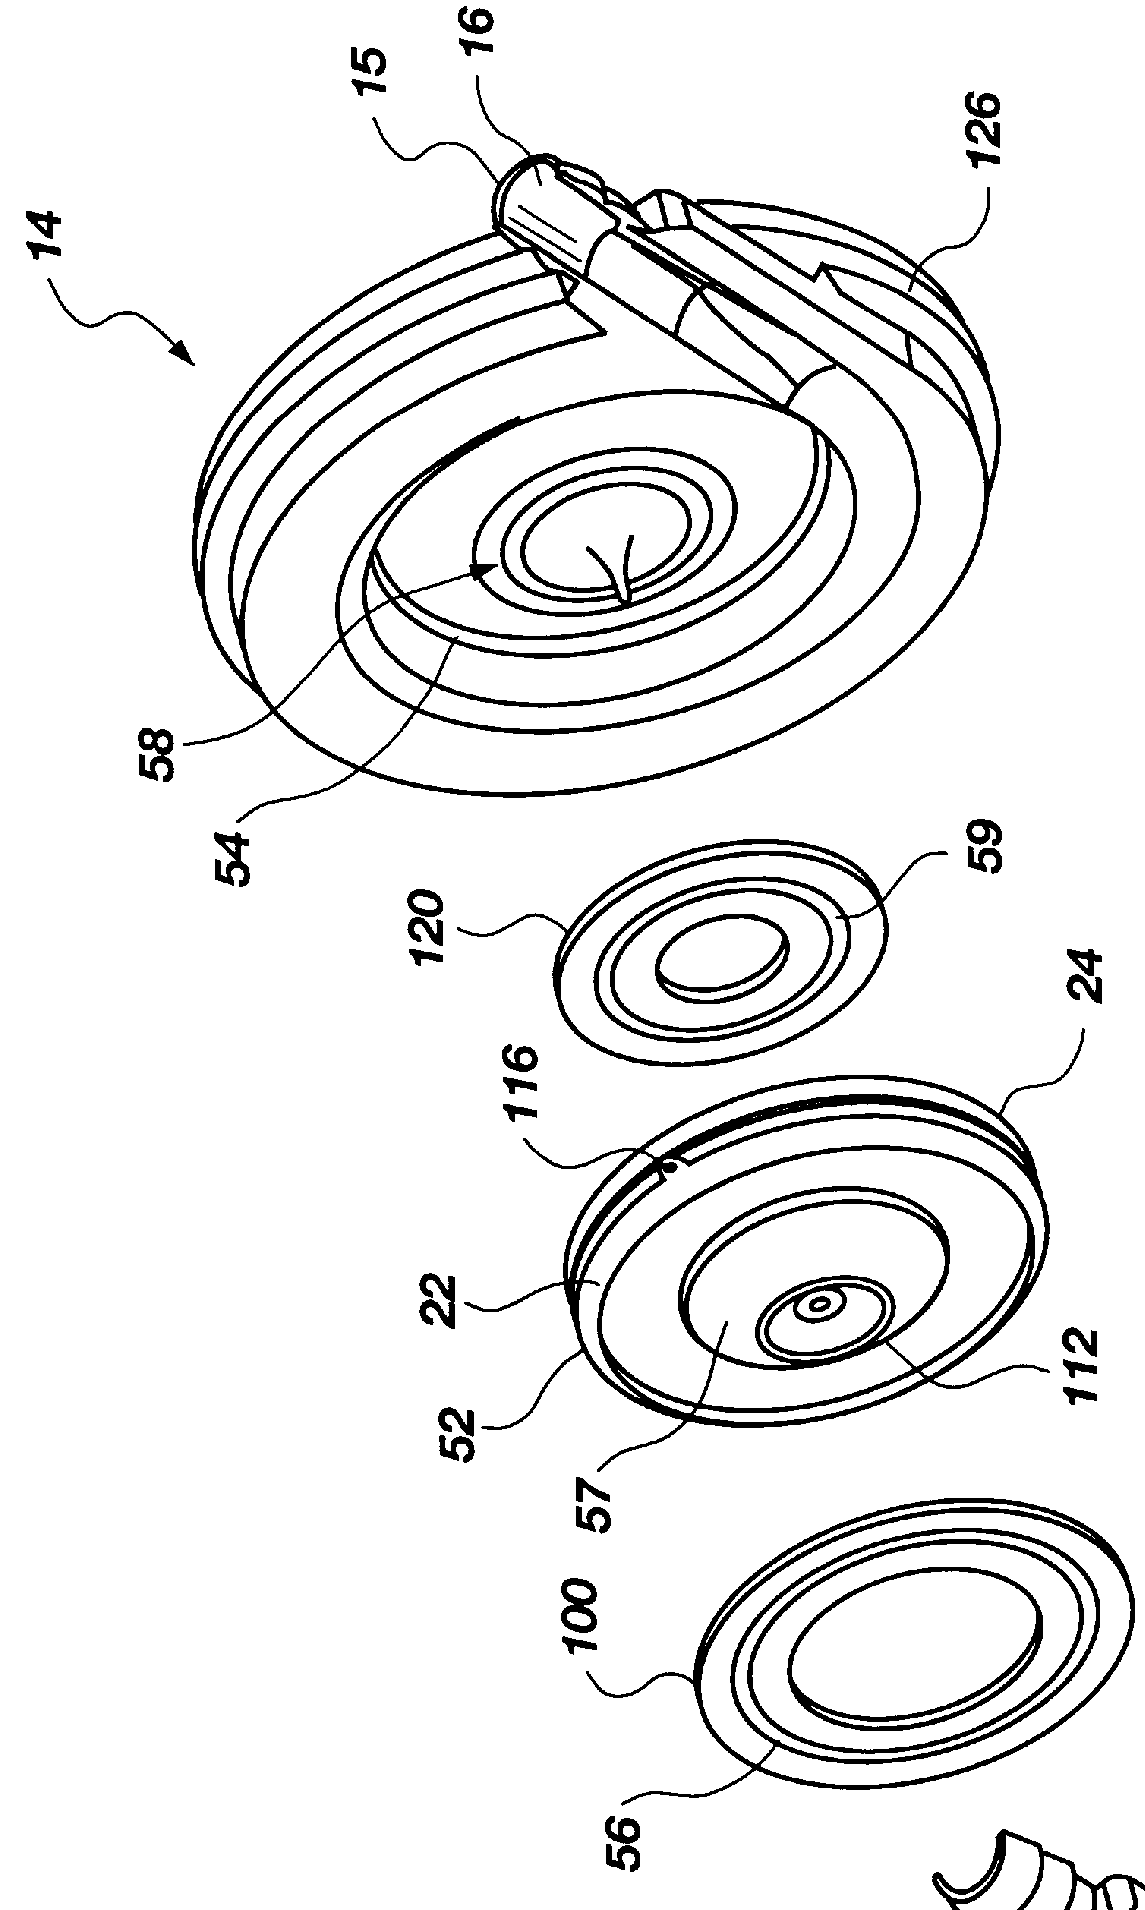 Hybrid magnetically suspended and rotated centrifugal pumping apparatus and method